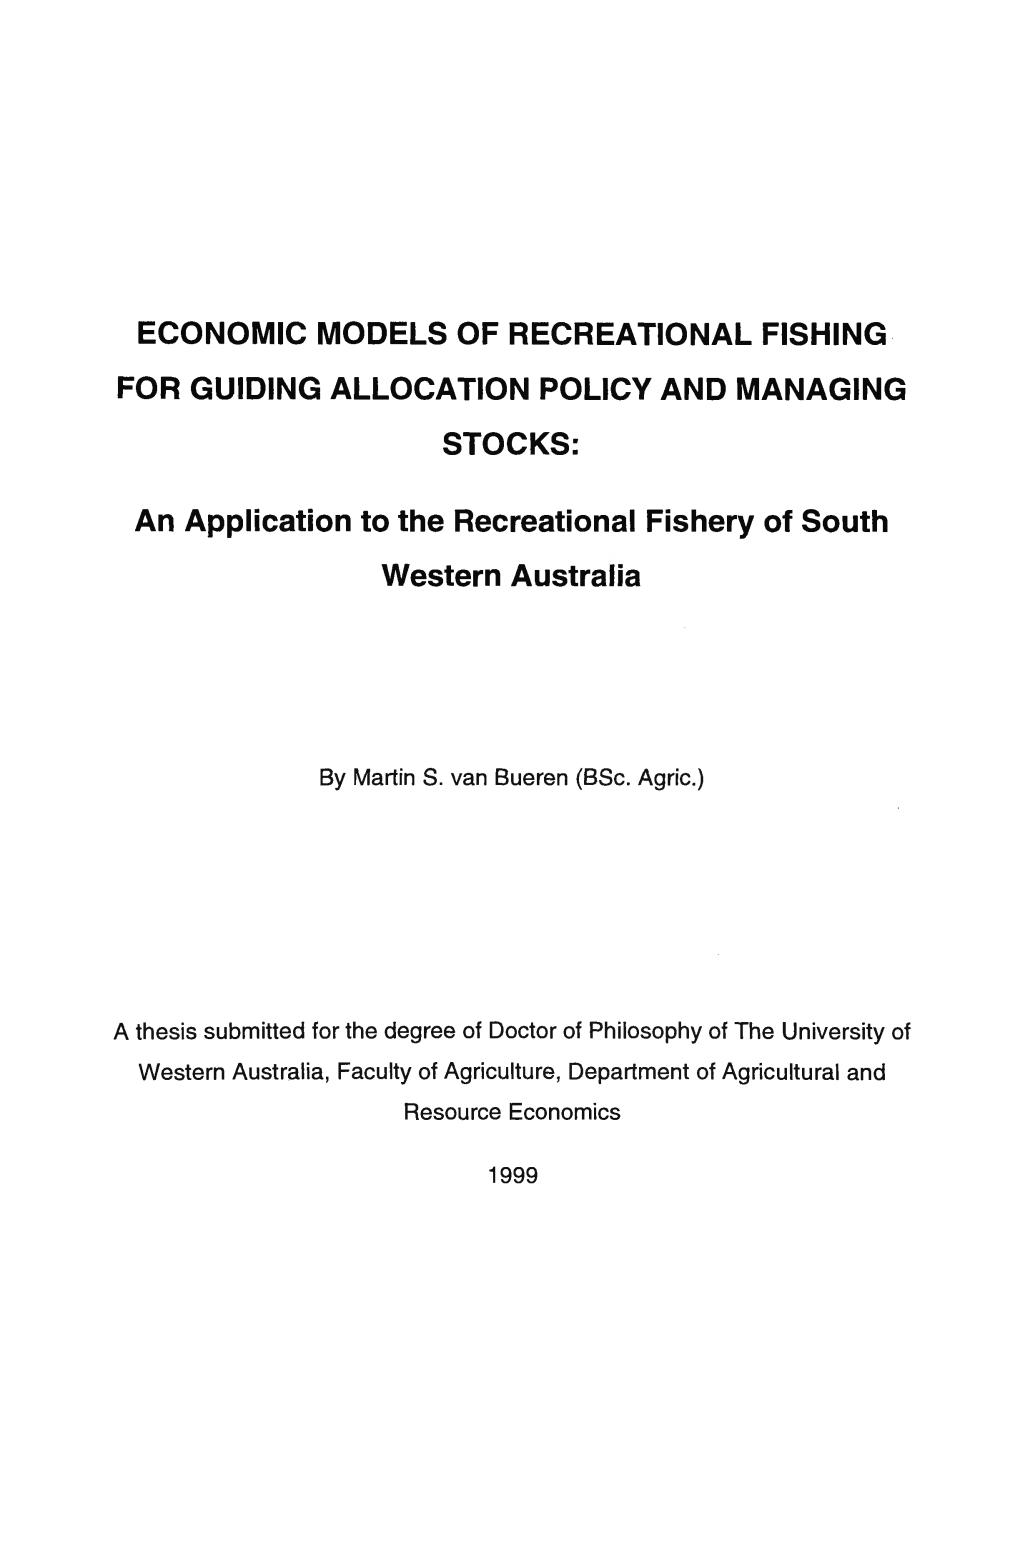 Economic Models of Recreational Fishing for Guiding Allocation Policy and Managing Stocks